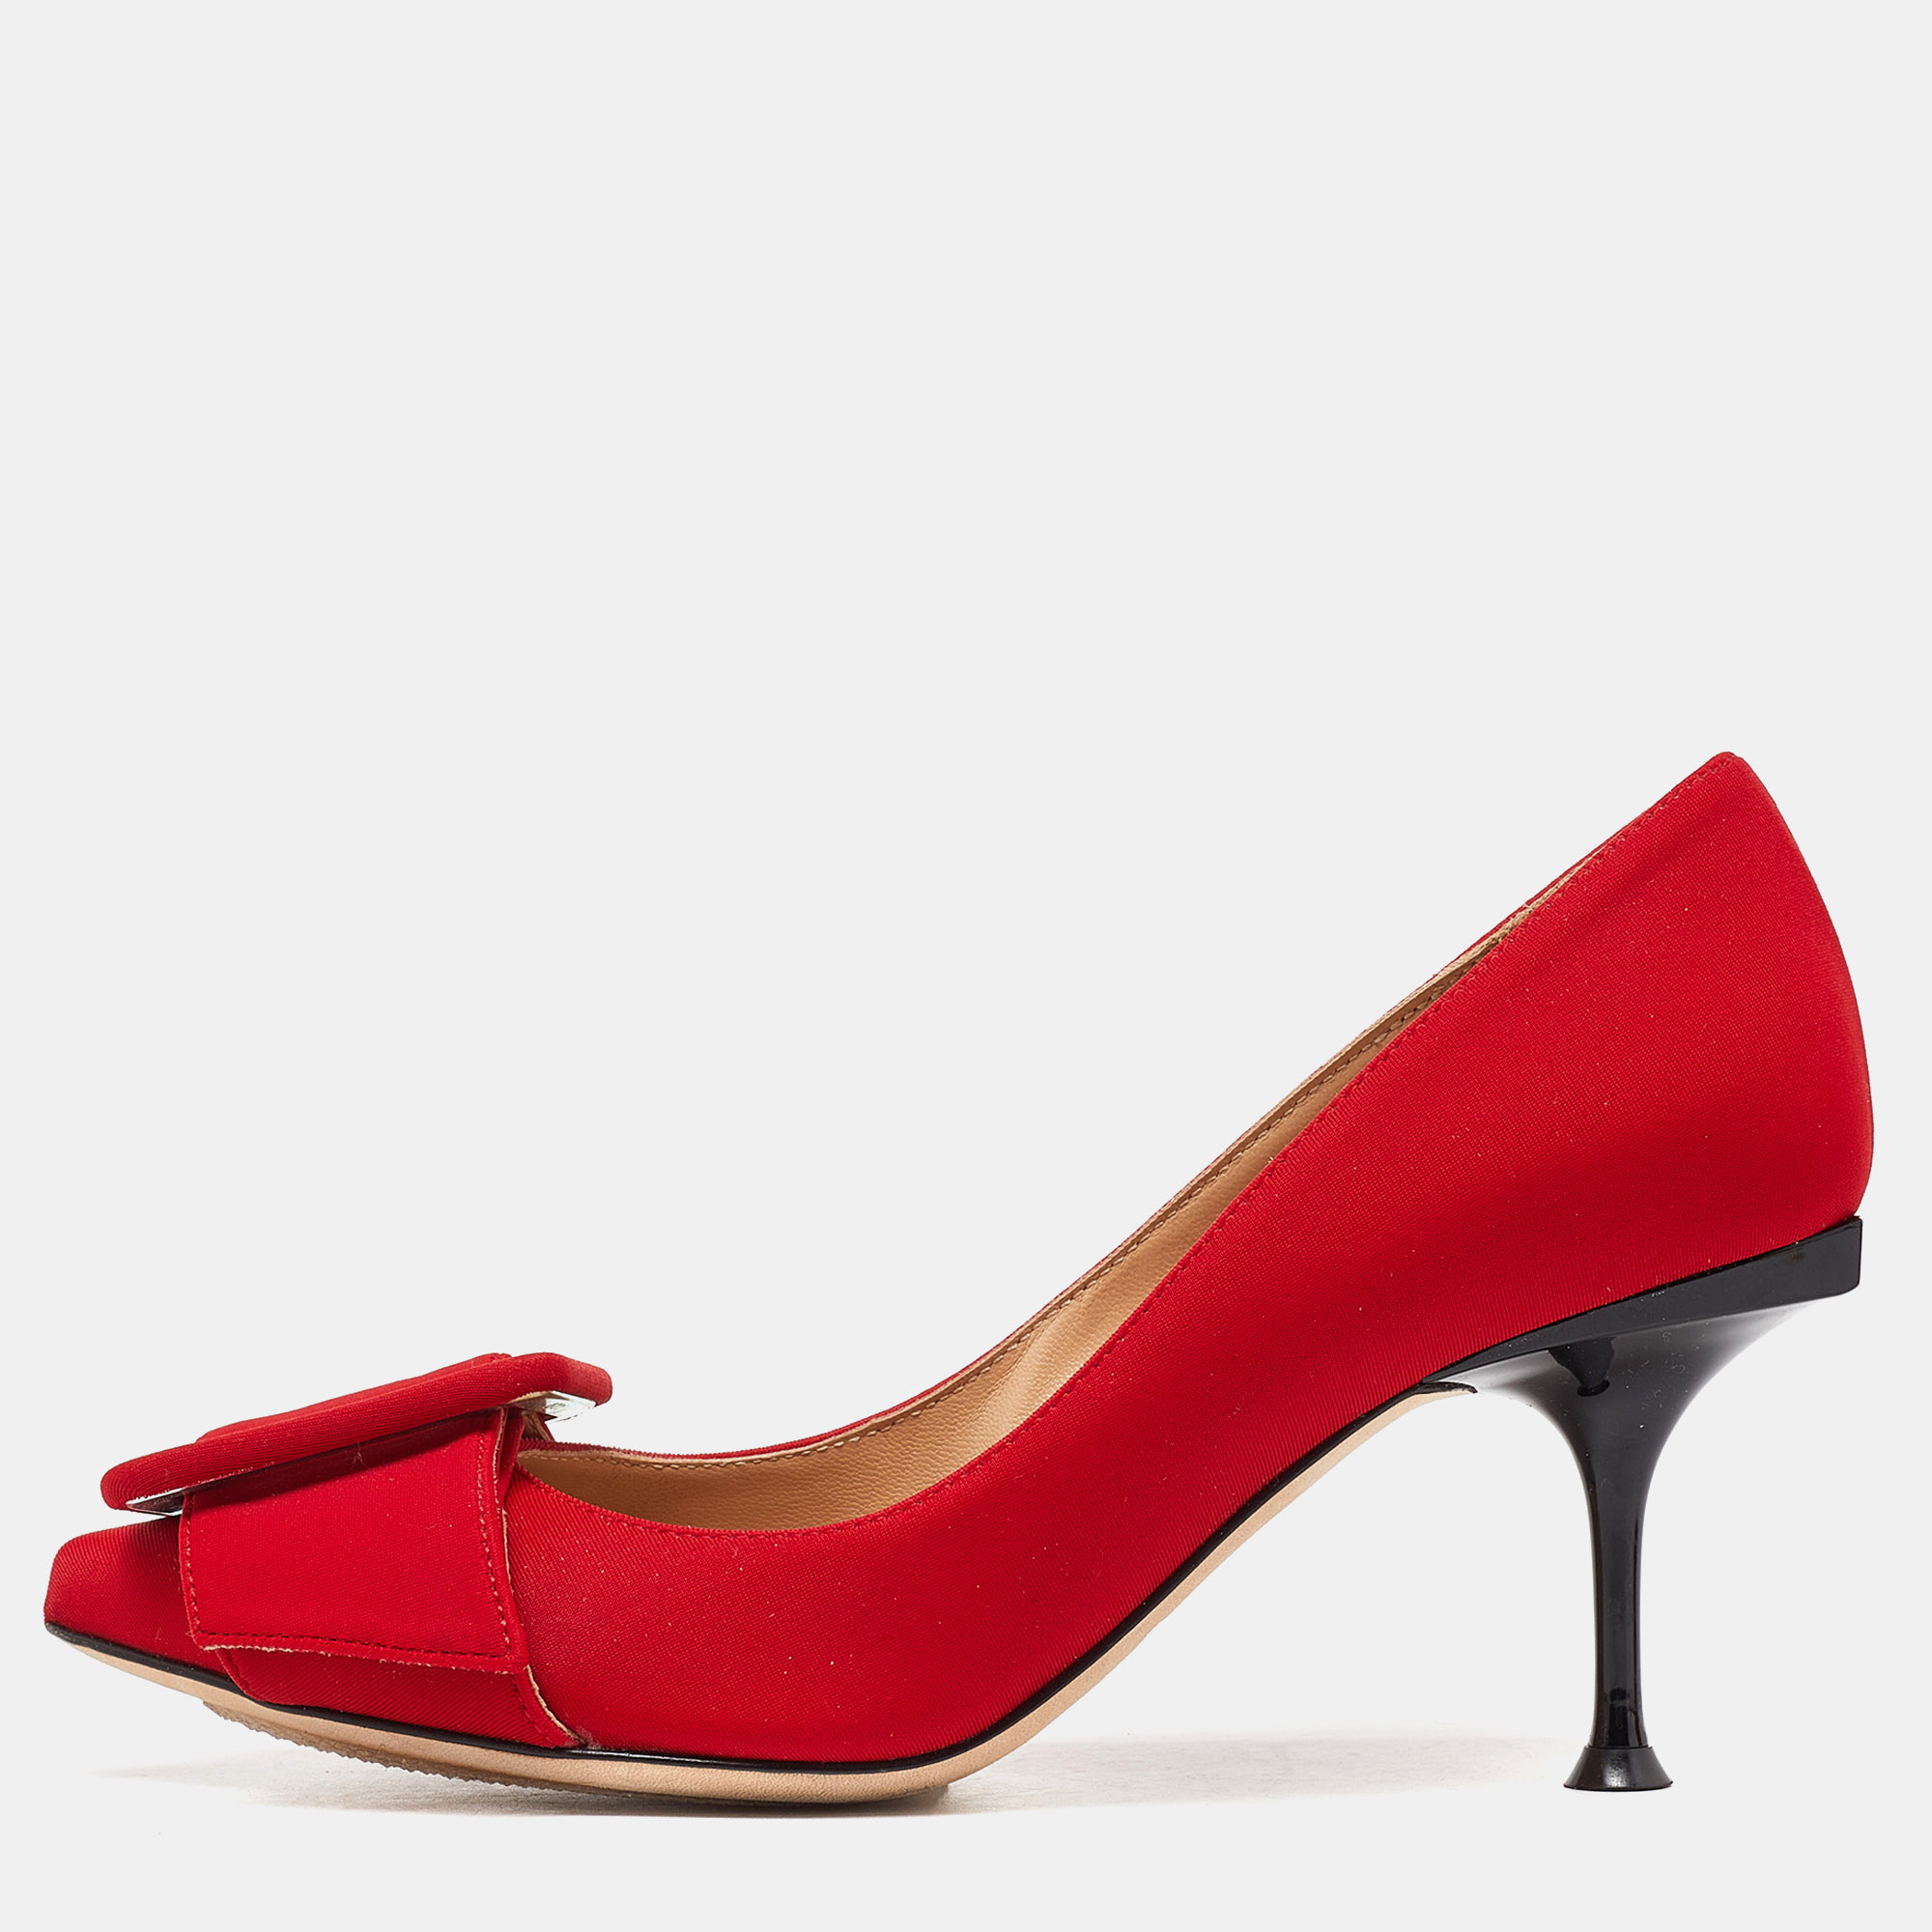 Sergio rossi red satin buckle pumps size 35.5